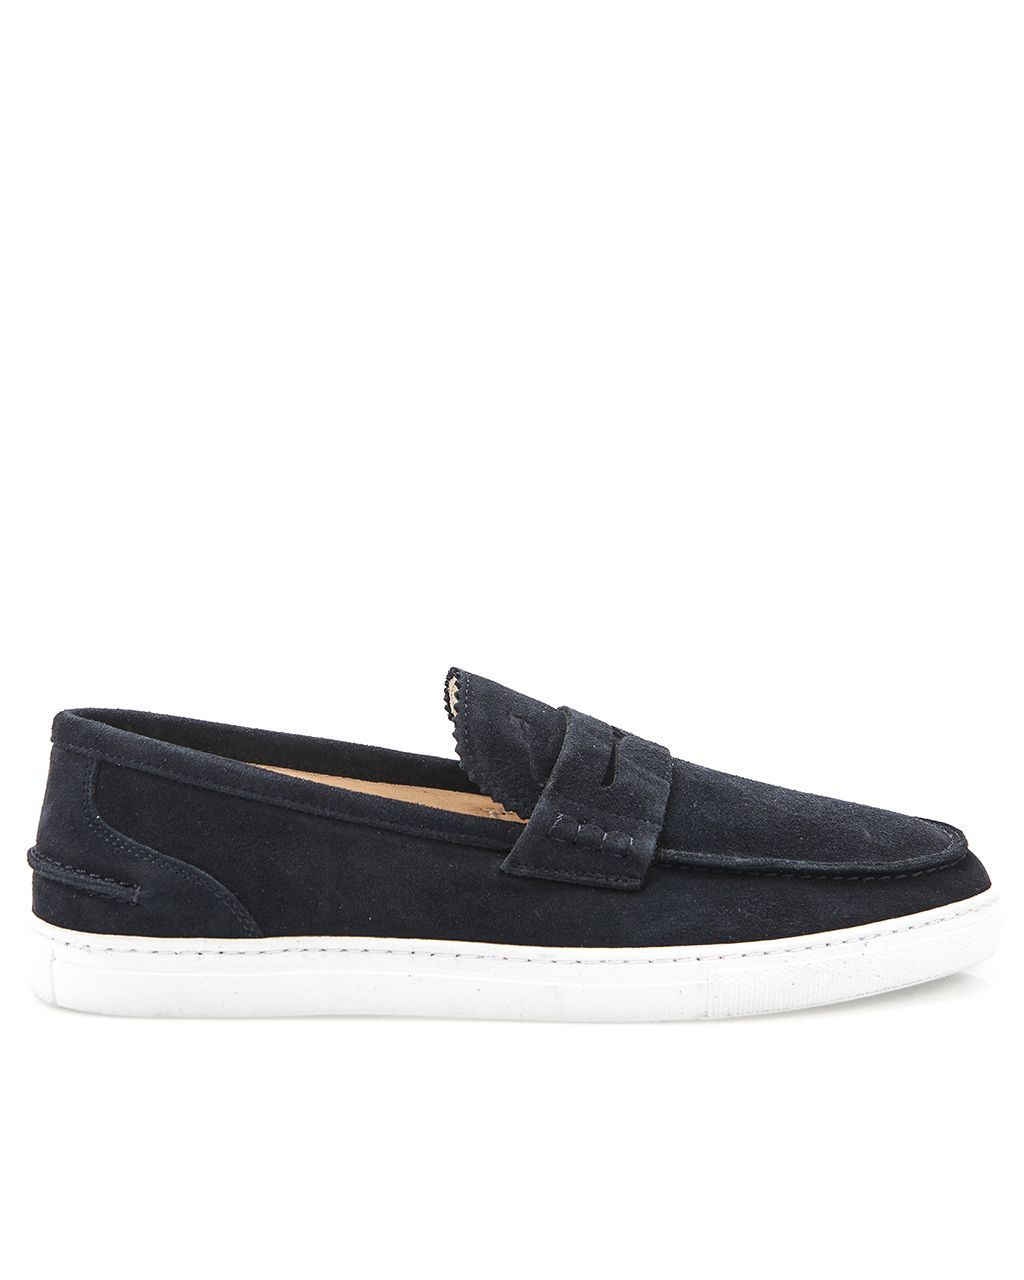 Parbleu Loafers Donker blauw 076584-001-41